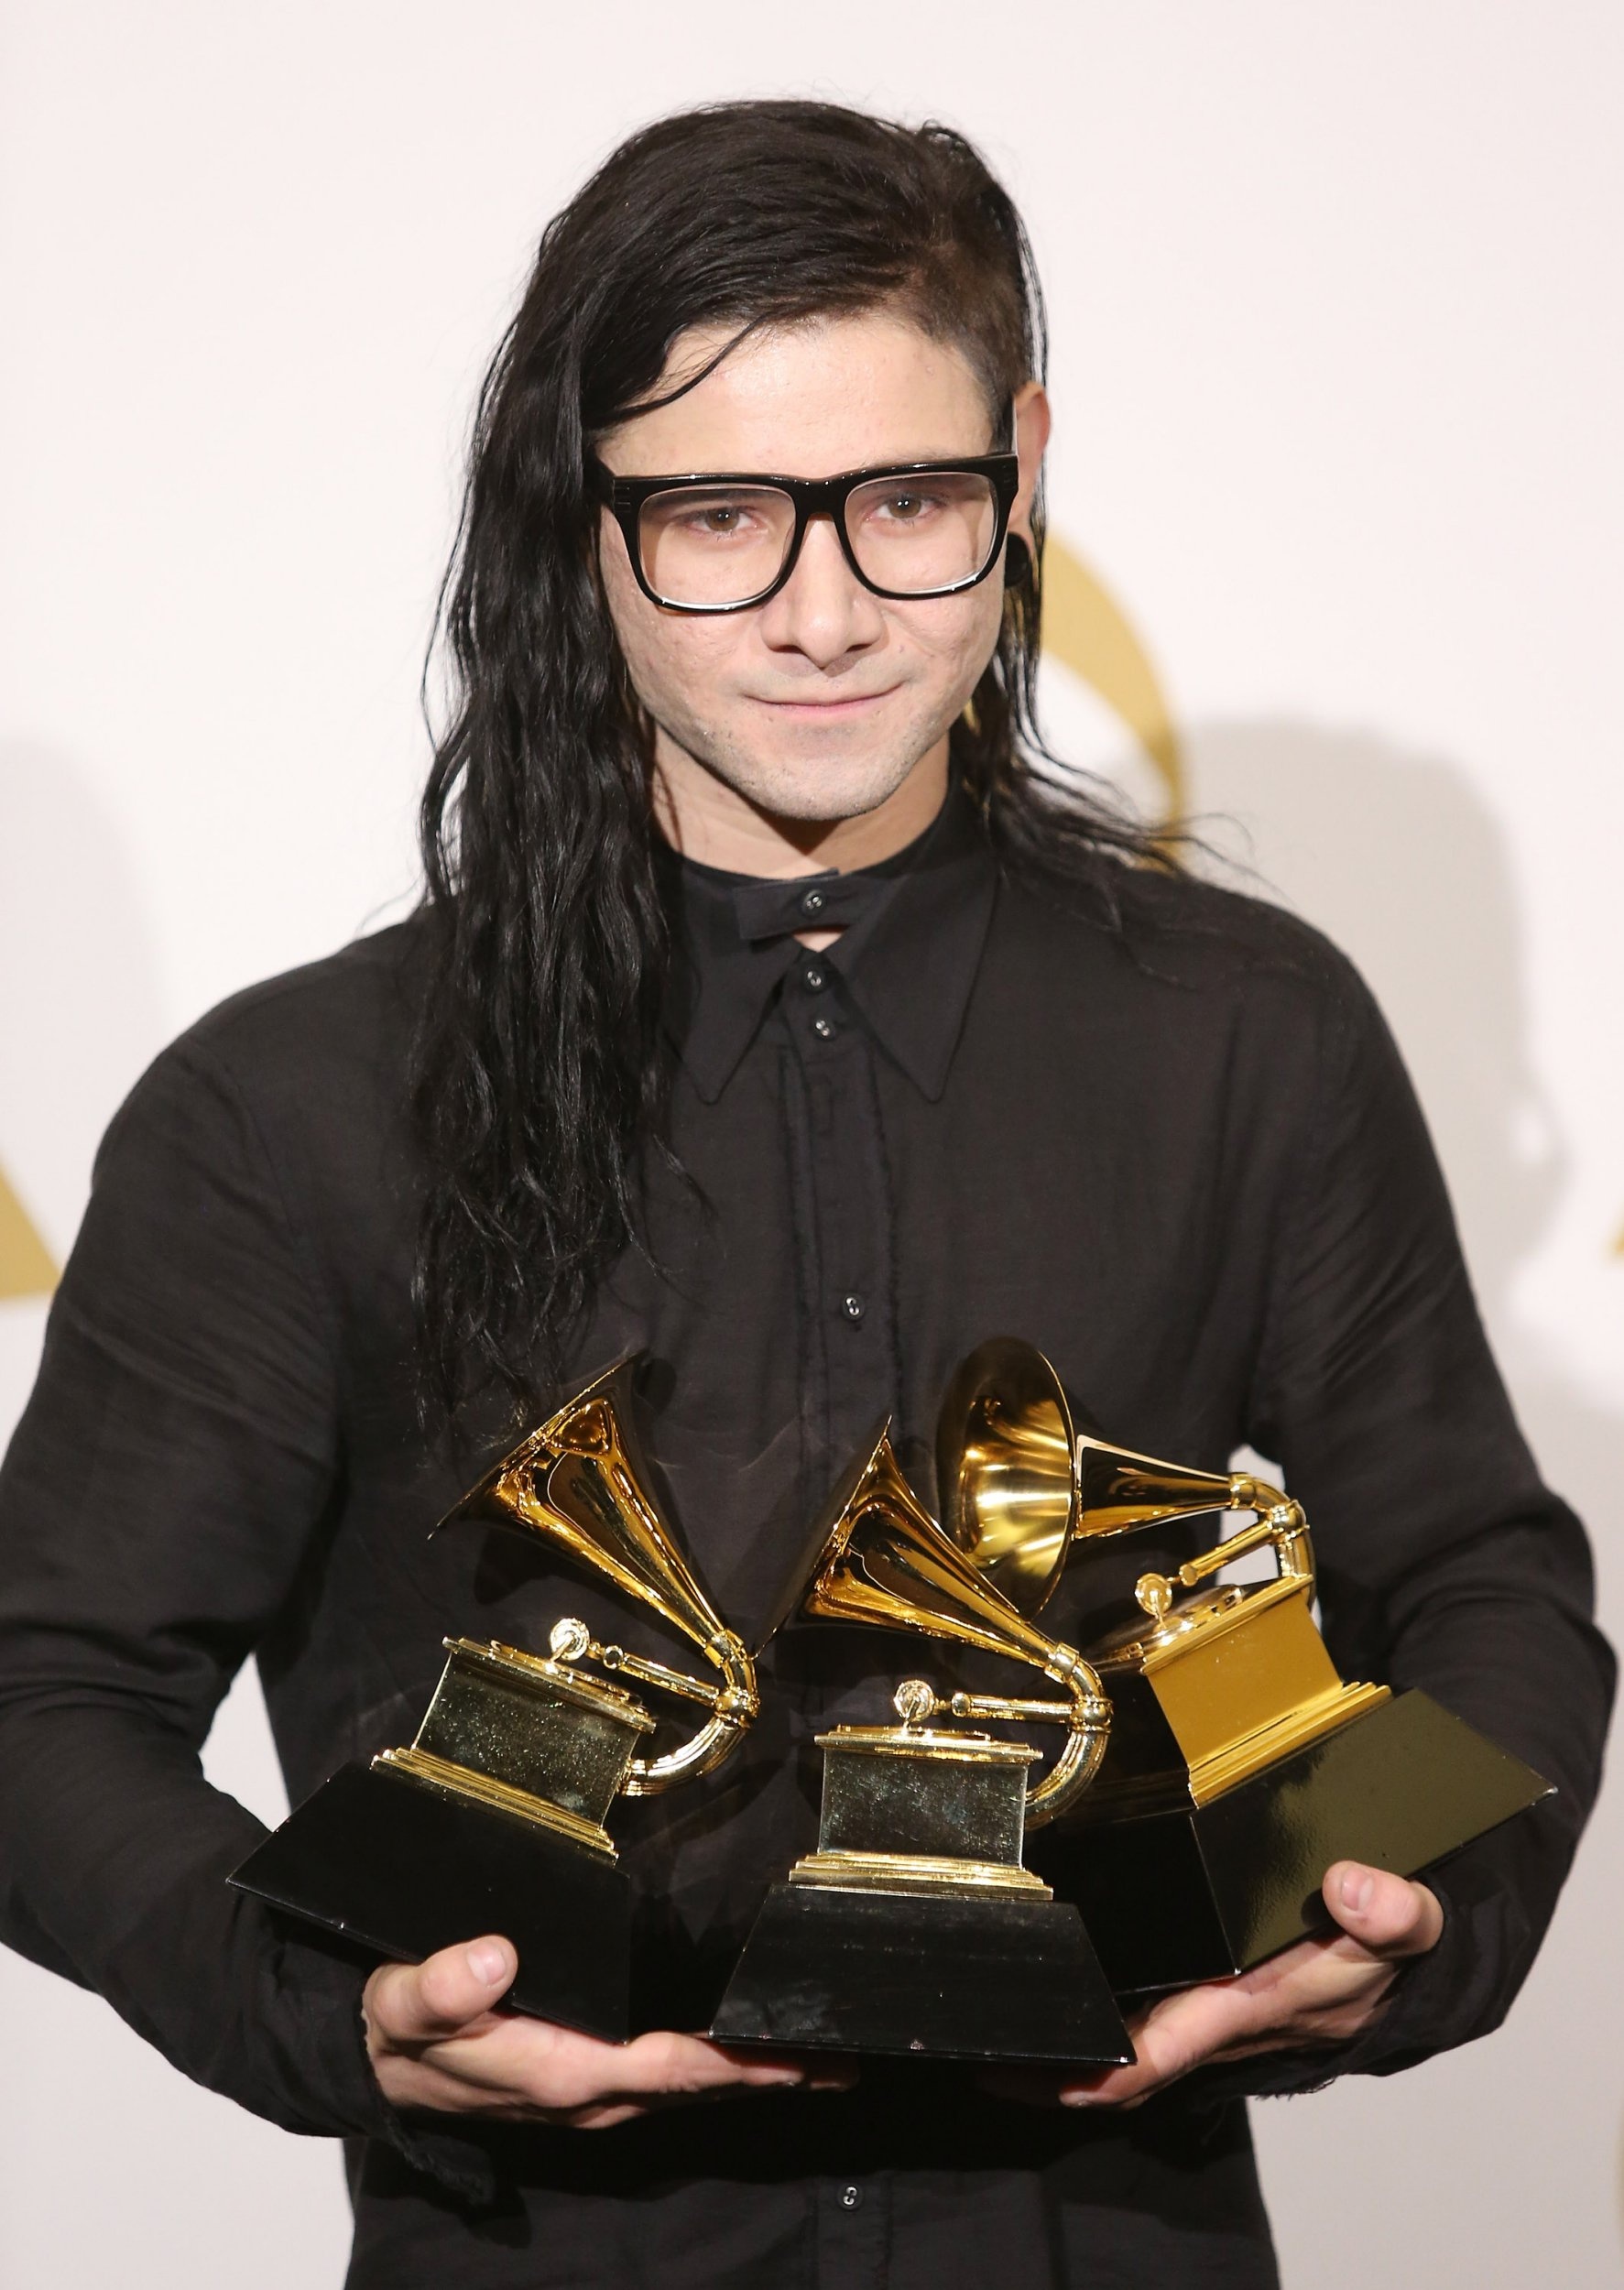 Who is Skrillex and what is his net worth? | The Sun 1780x2500